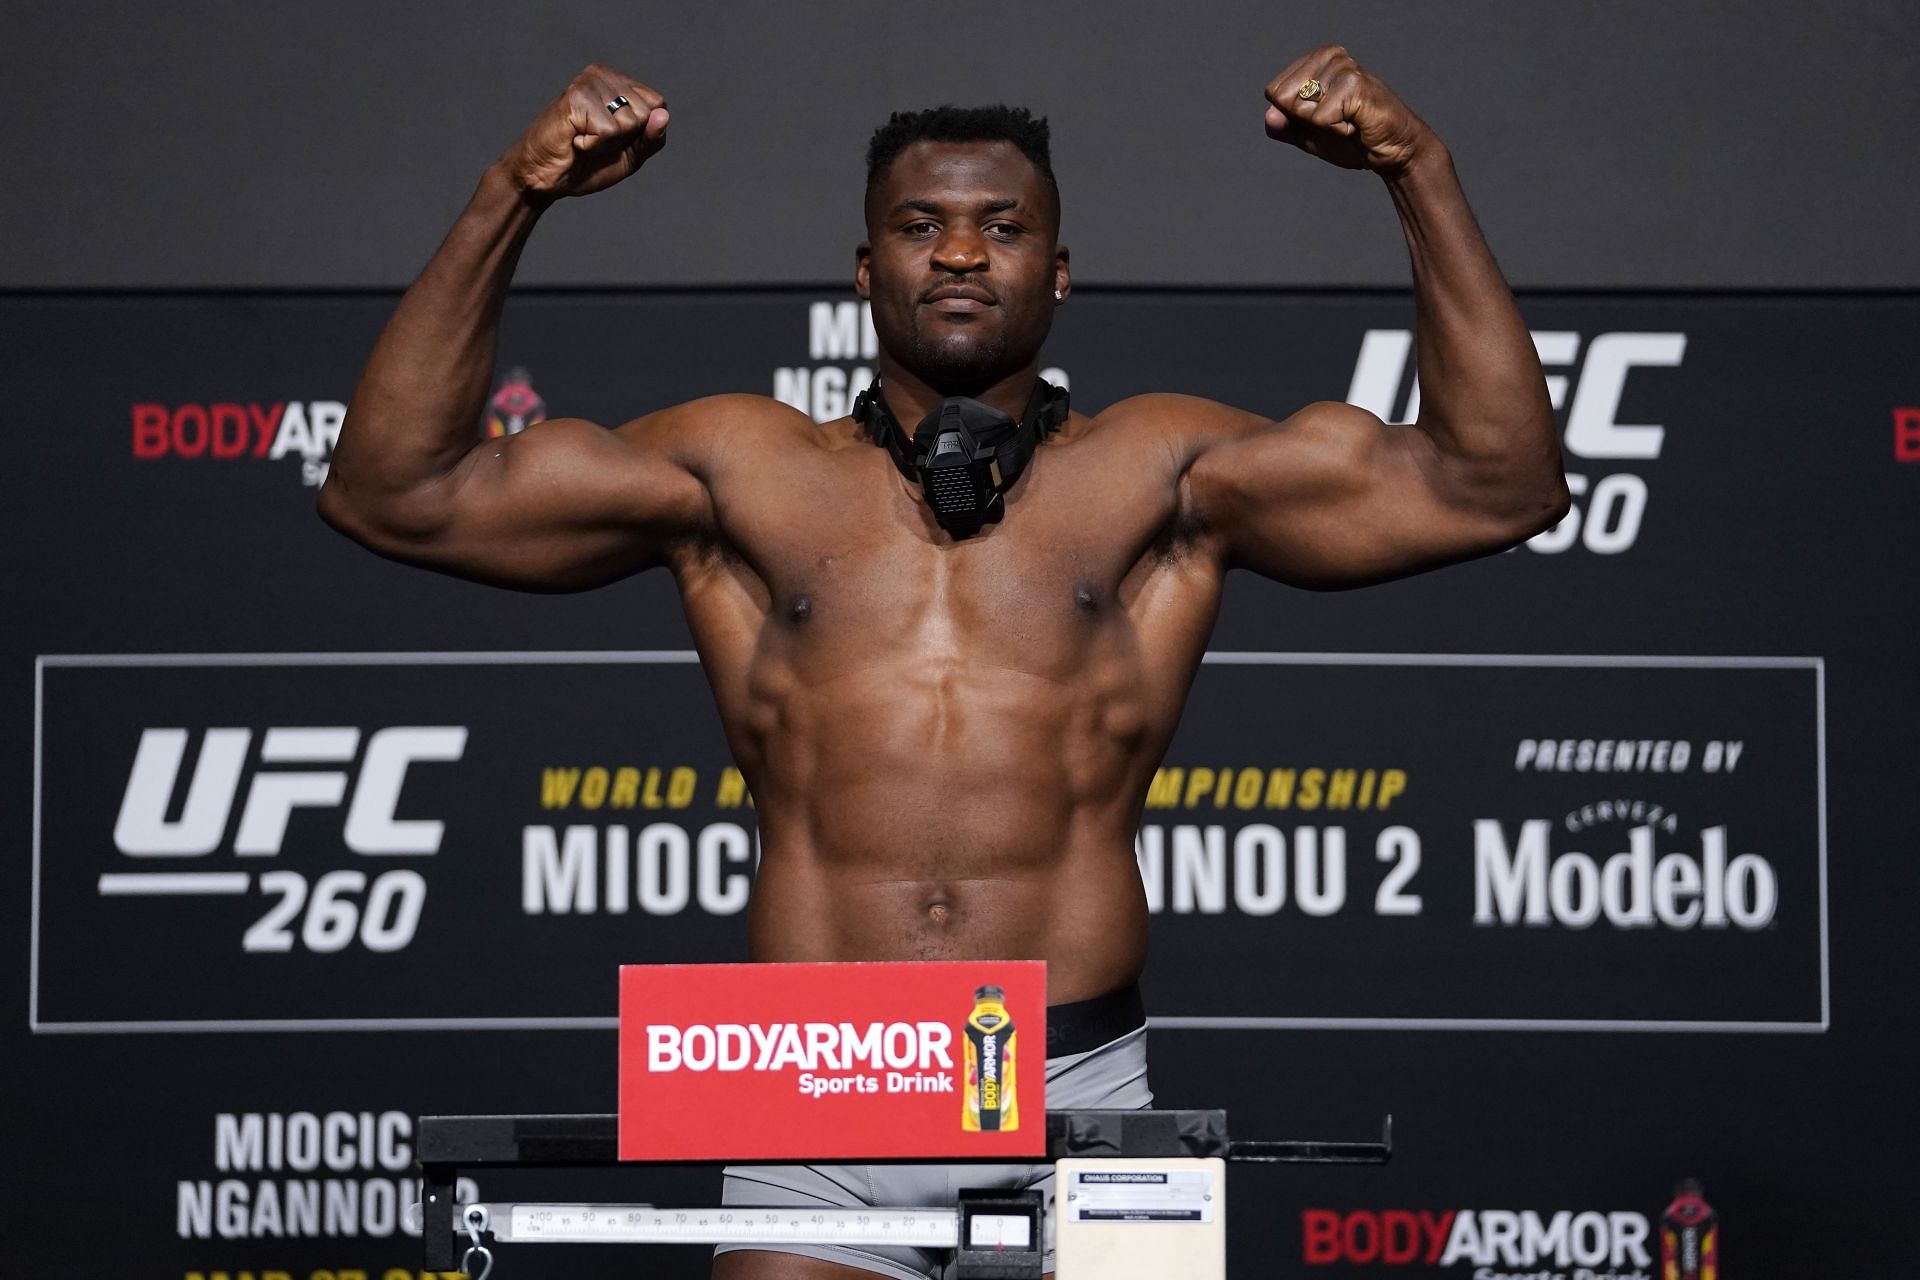 UFC 260 Stipe Miocic vs. Francis Ngannou 2: Weigh-Ins